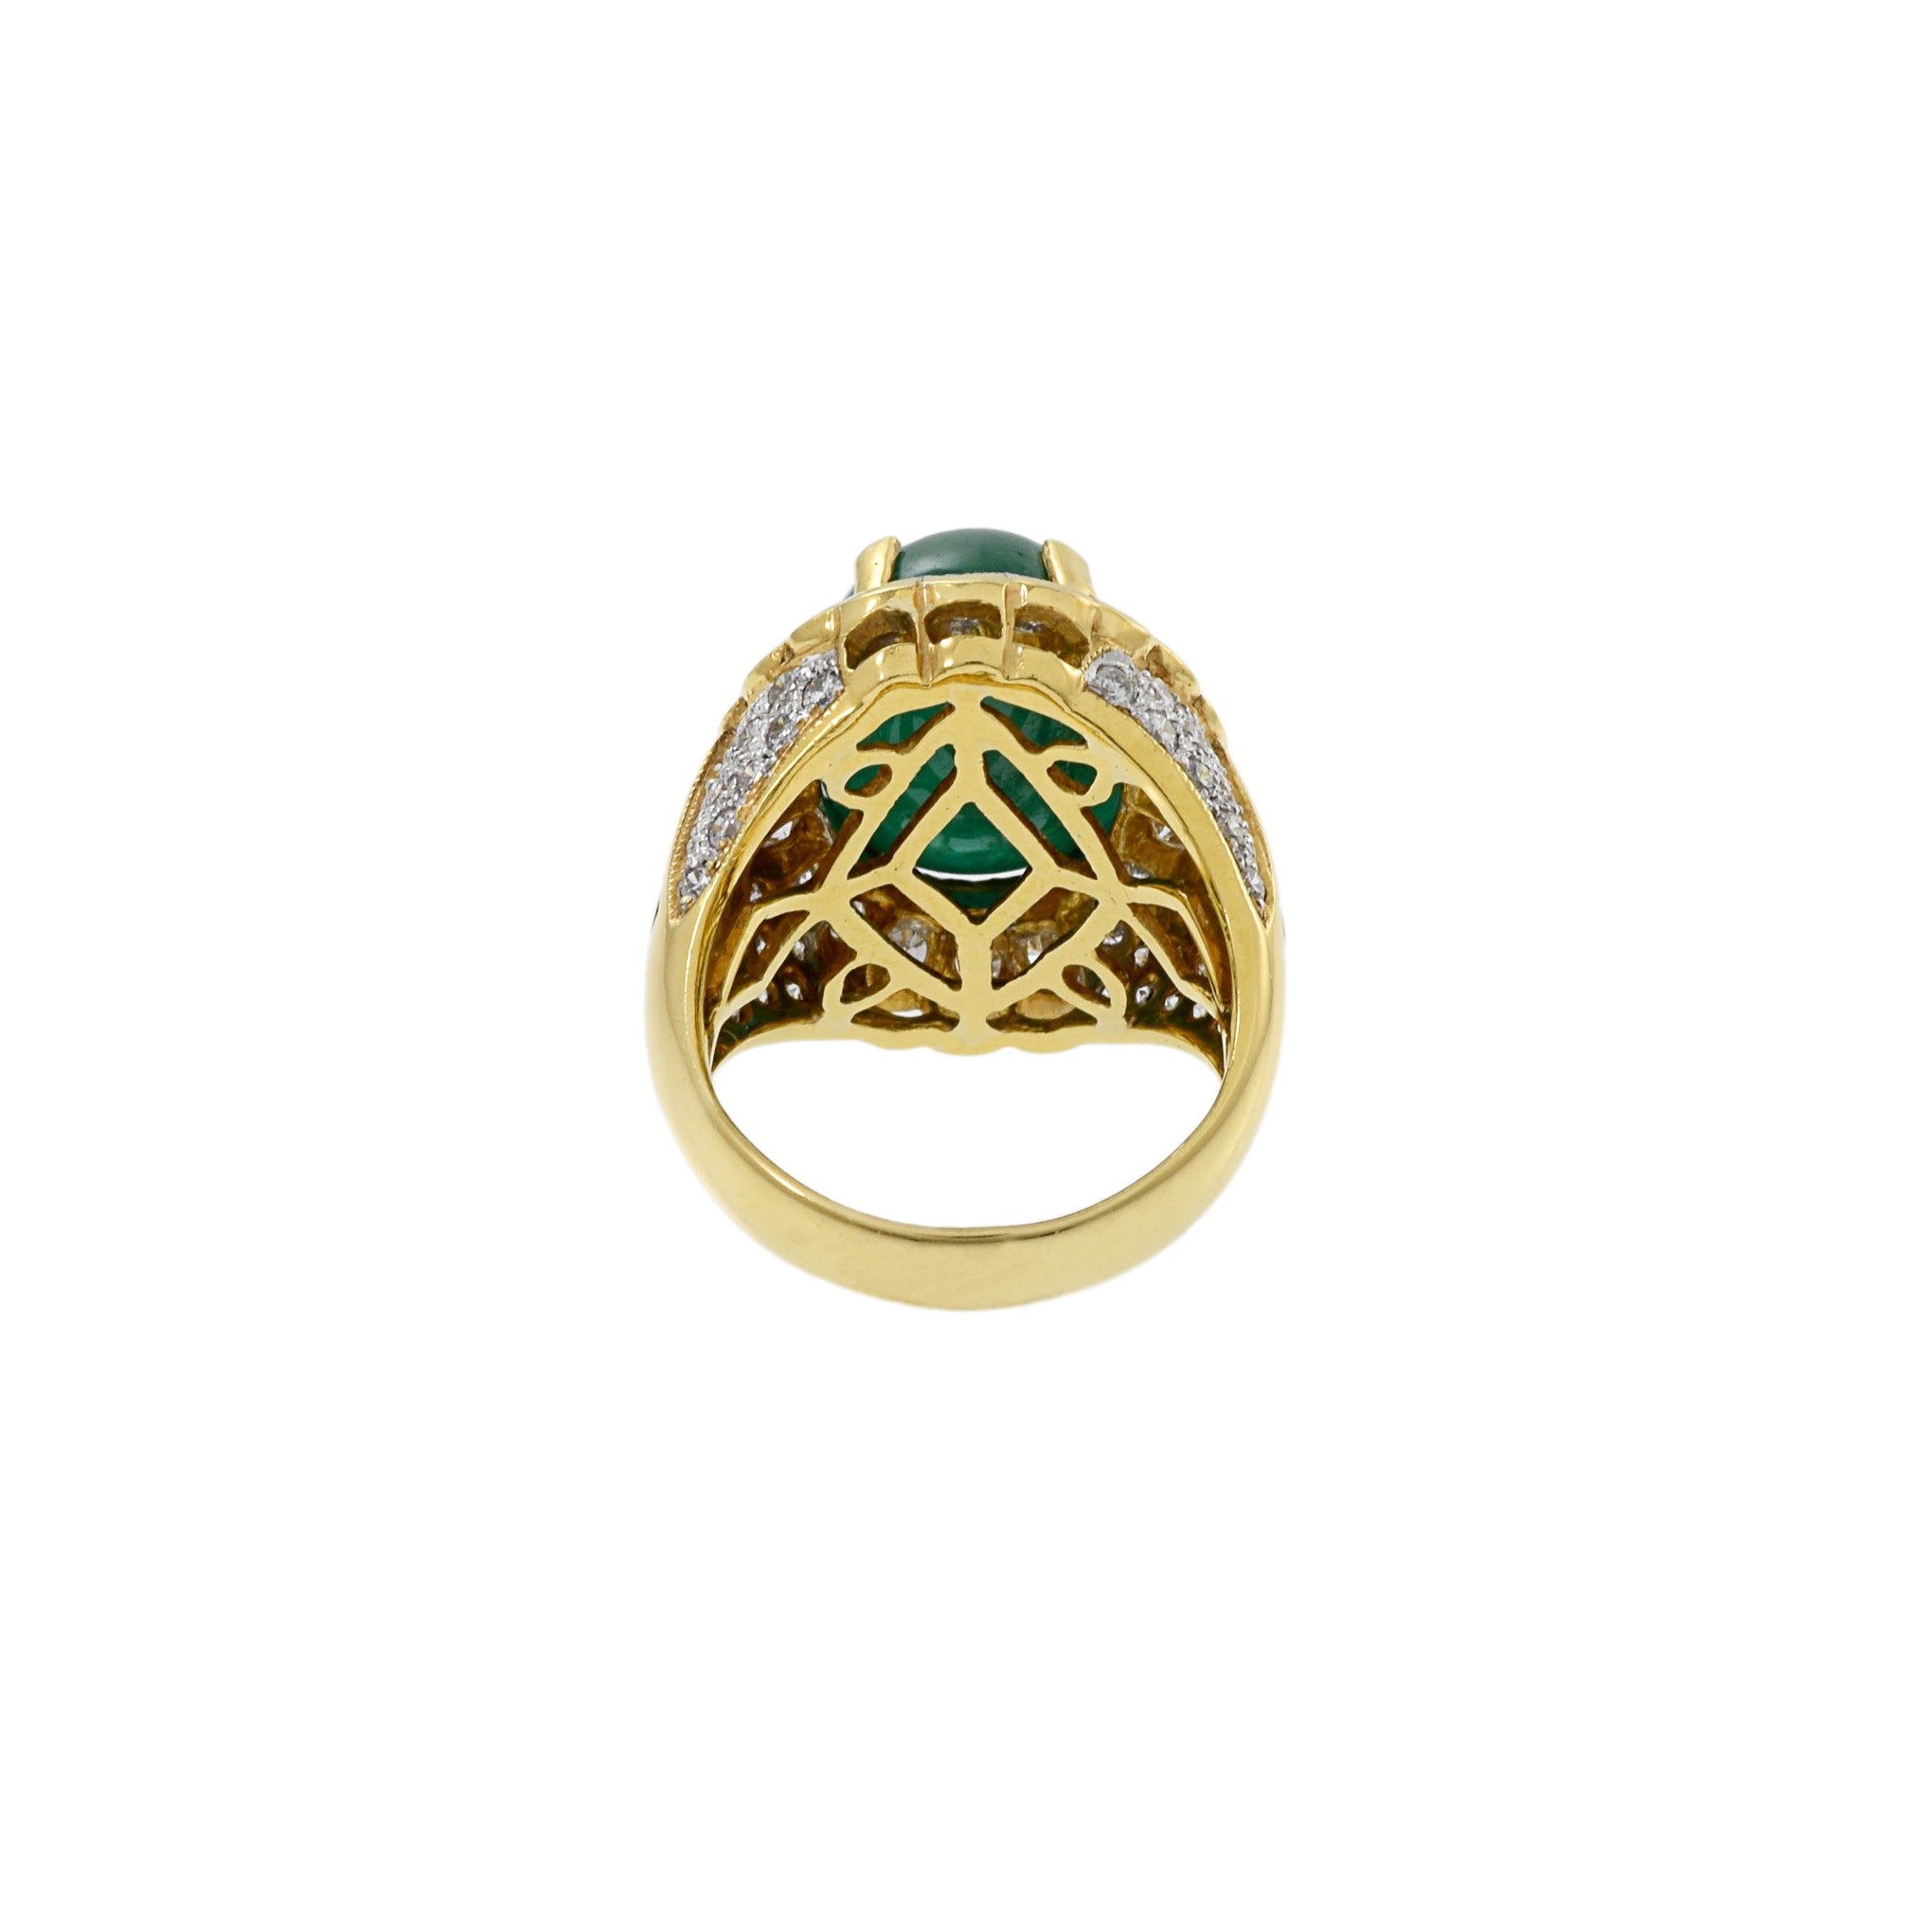 18kt Yellow Gold, Emerald and Diamond Ring